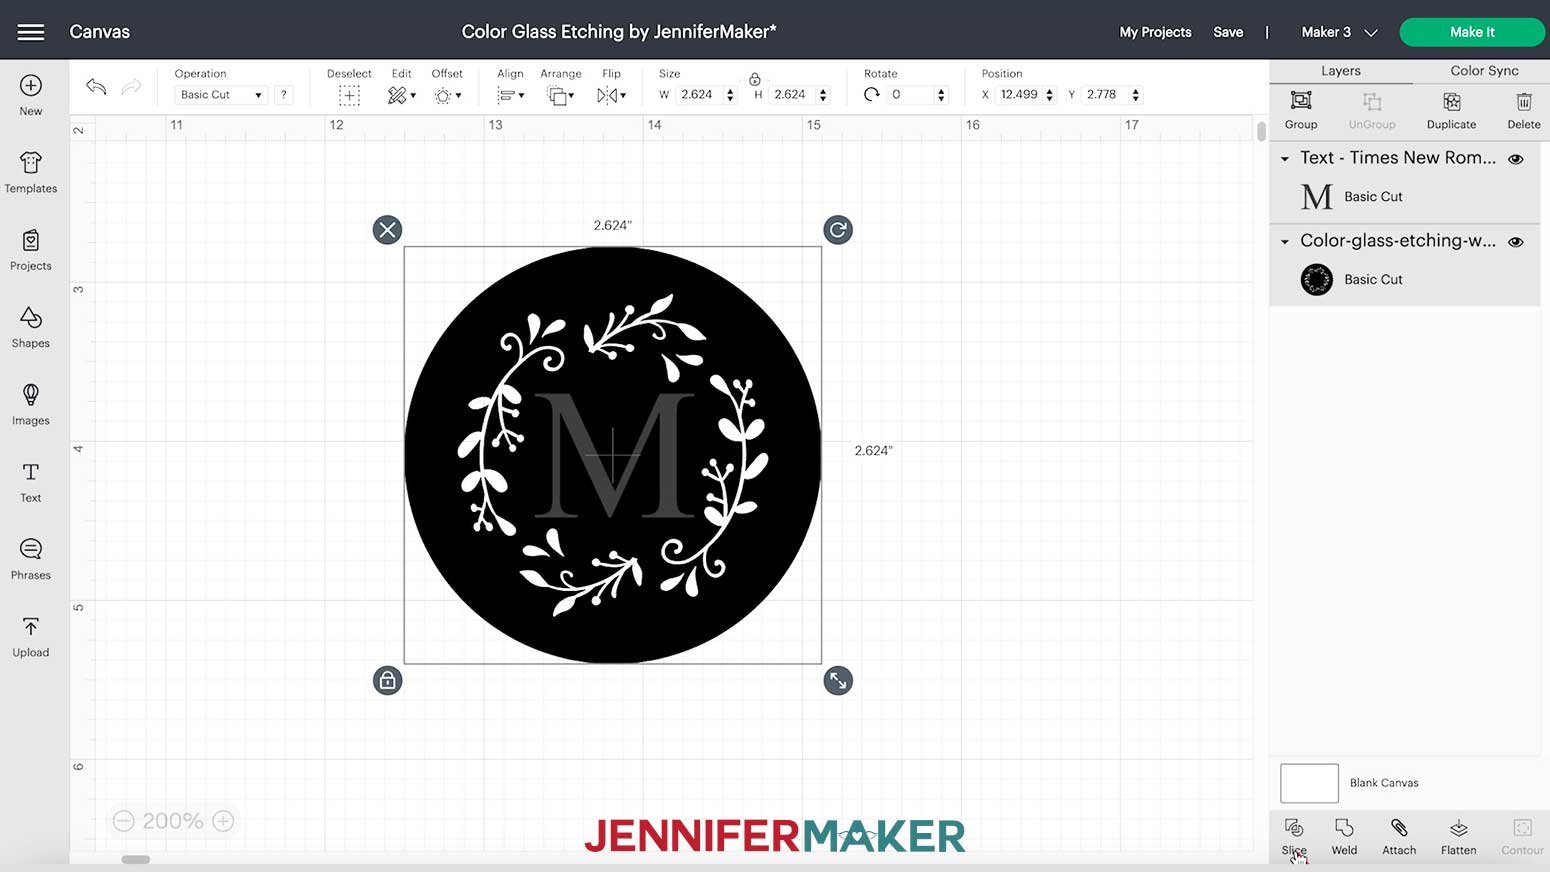 A screenshot showing the wine glass design and the letter M on the Cricut Design Space canvas, with both objects center aligned and selected and the cursor hovering over the Slice tool in the bottom right